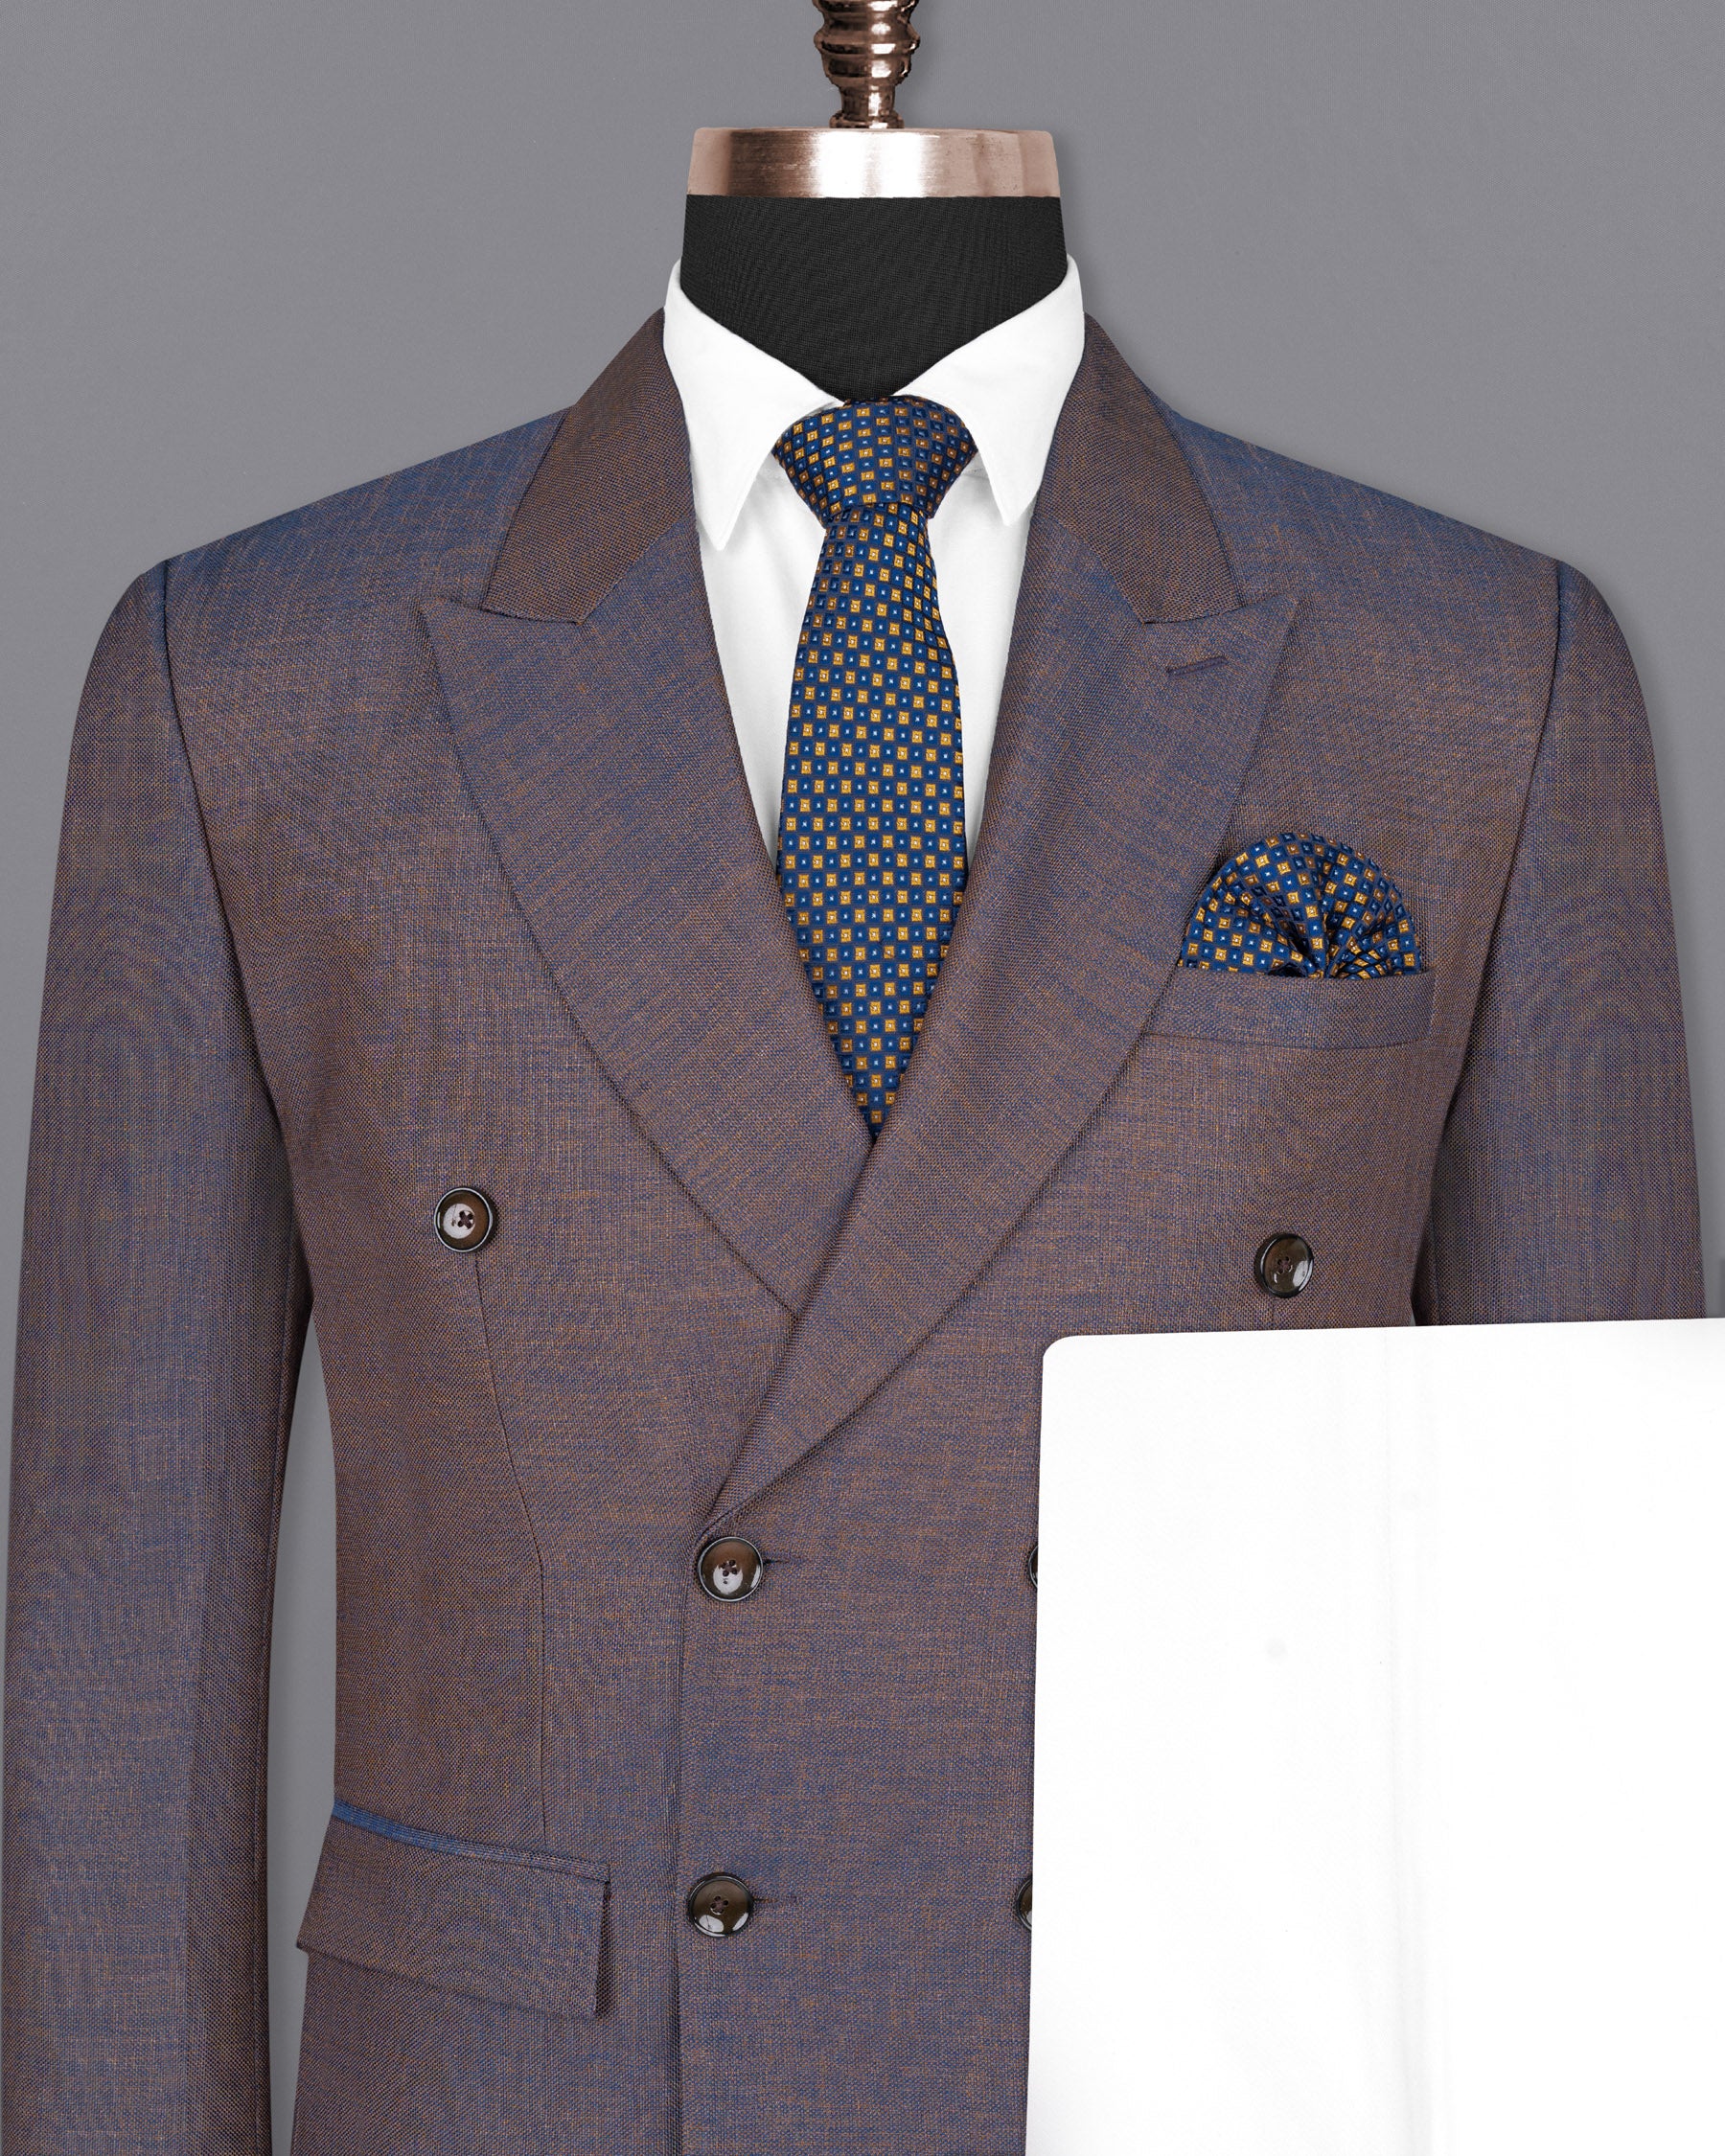 Brownish with Downriver Blue Two Tone Double Breasted Designer Suit ST1642-DB-36, ST1642-DB-38, ST1642-DB-40, ST1642-DB-42, ST1642-DB-44, ST1642-DB-46, ST1642-DB-48, ST1642-DB-50, ST1642-DB-52, ST1642-DB-54, ST1642-DB-56, ST1642-DB-58, ST1642-DB-60